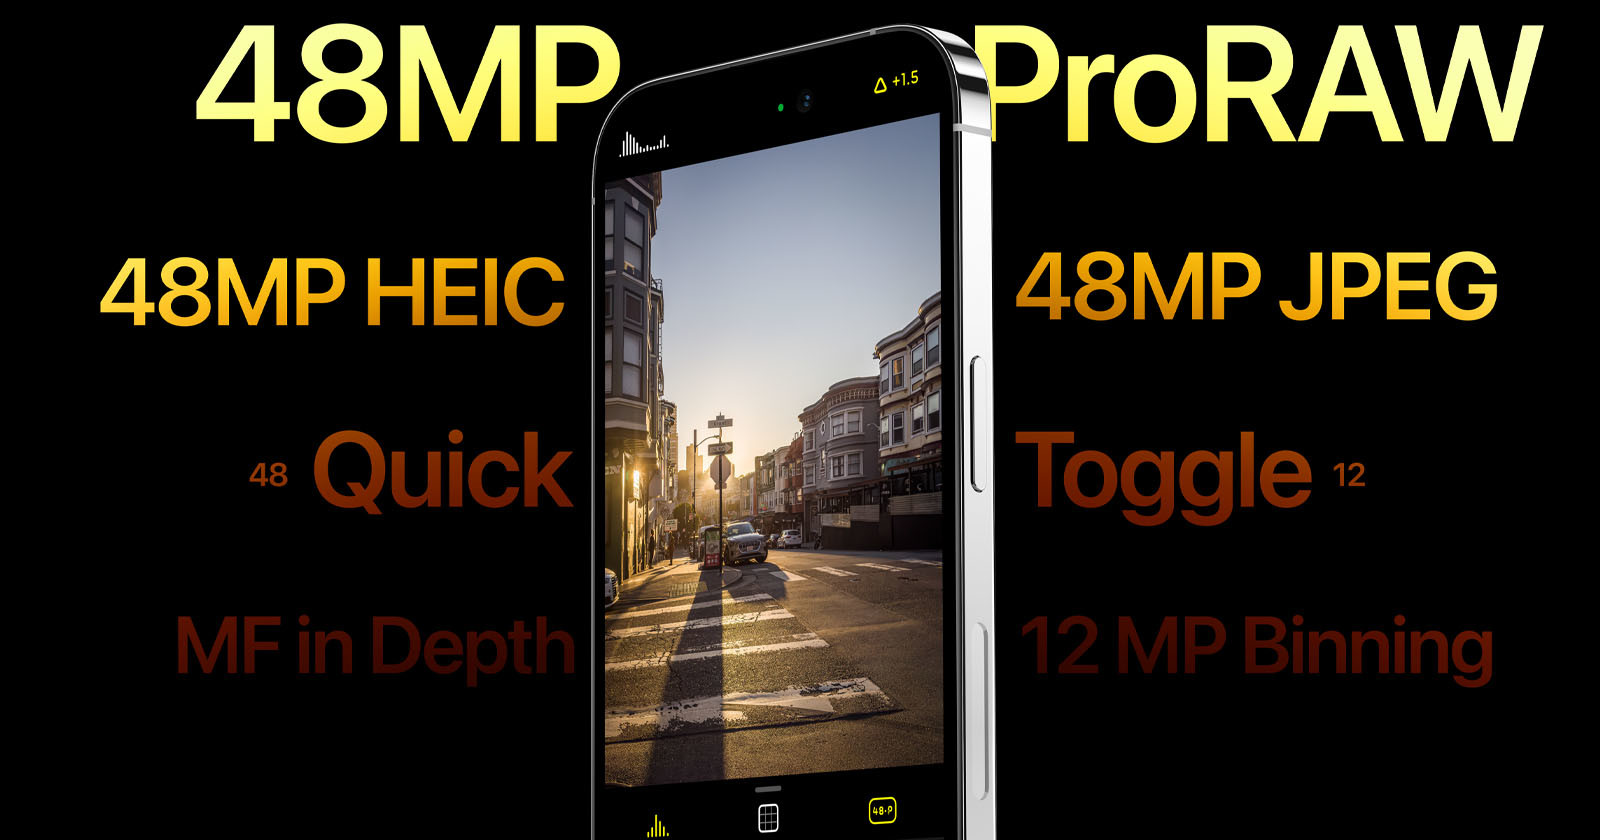 Update to Halide Adds 48MP ProRAW and Manual Focus Depth Capture